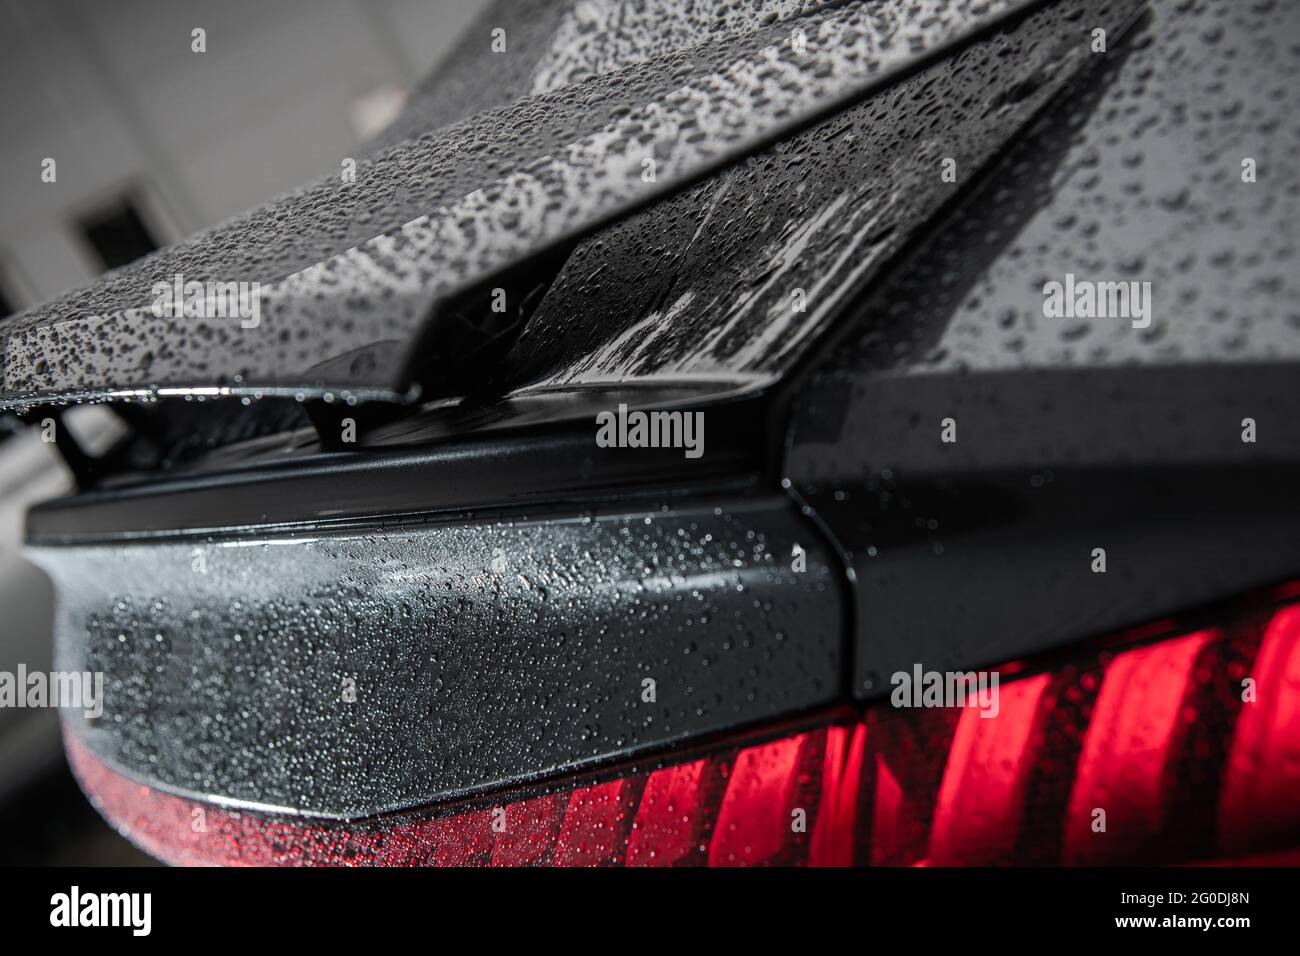 Automotive Theme. Detailed Modern Car Washing. Luxury Vehicle Spoiler and Tail Lights Covered by Water Drops Right After Washing Close Up Stock Photo